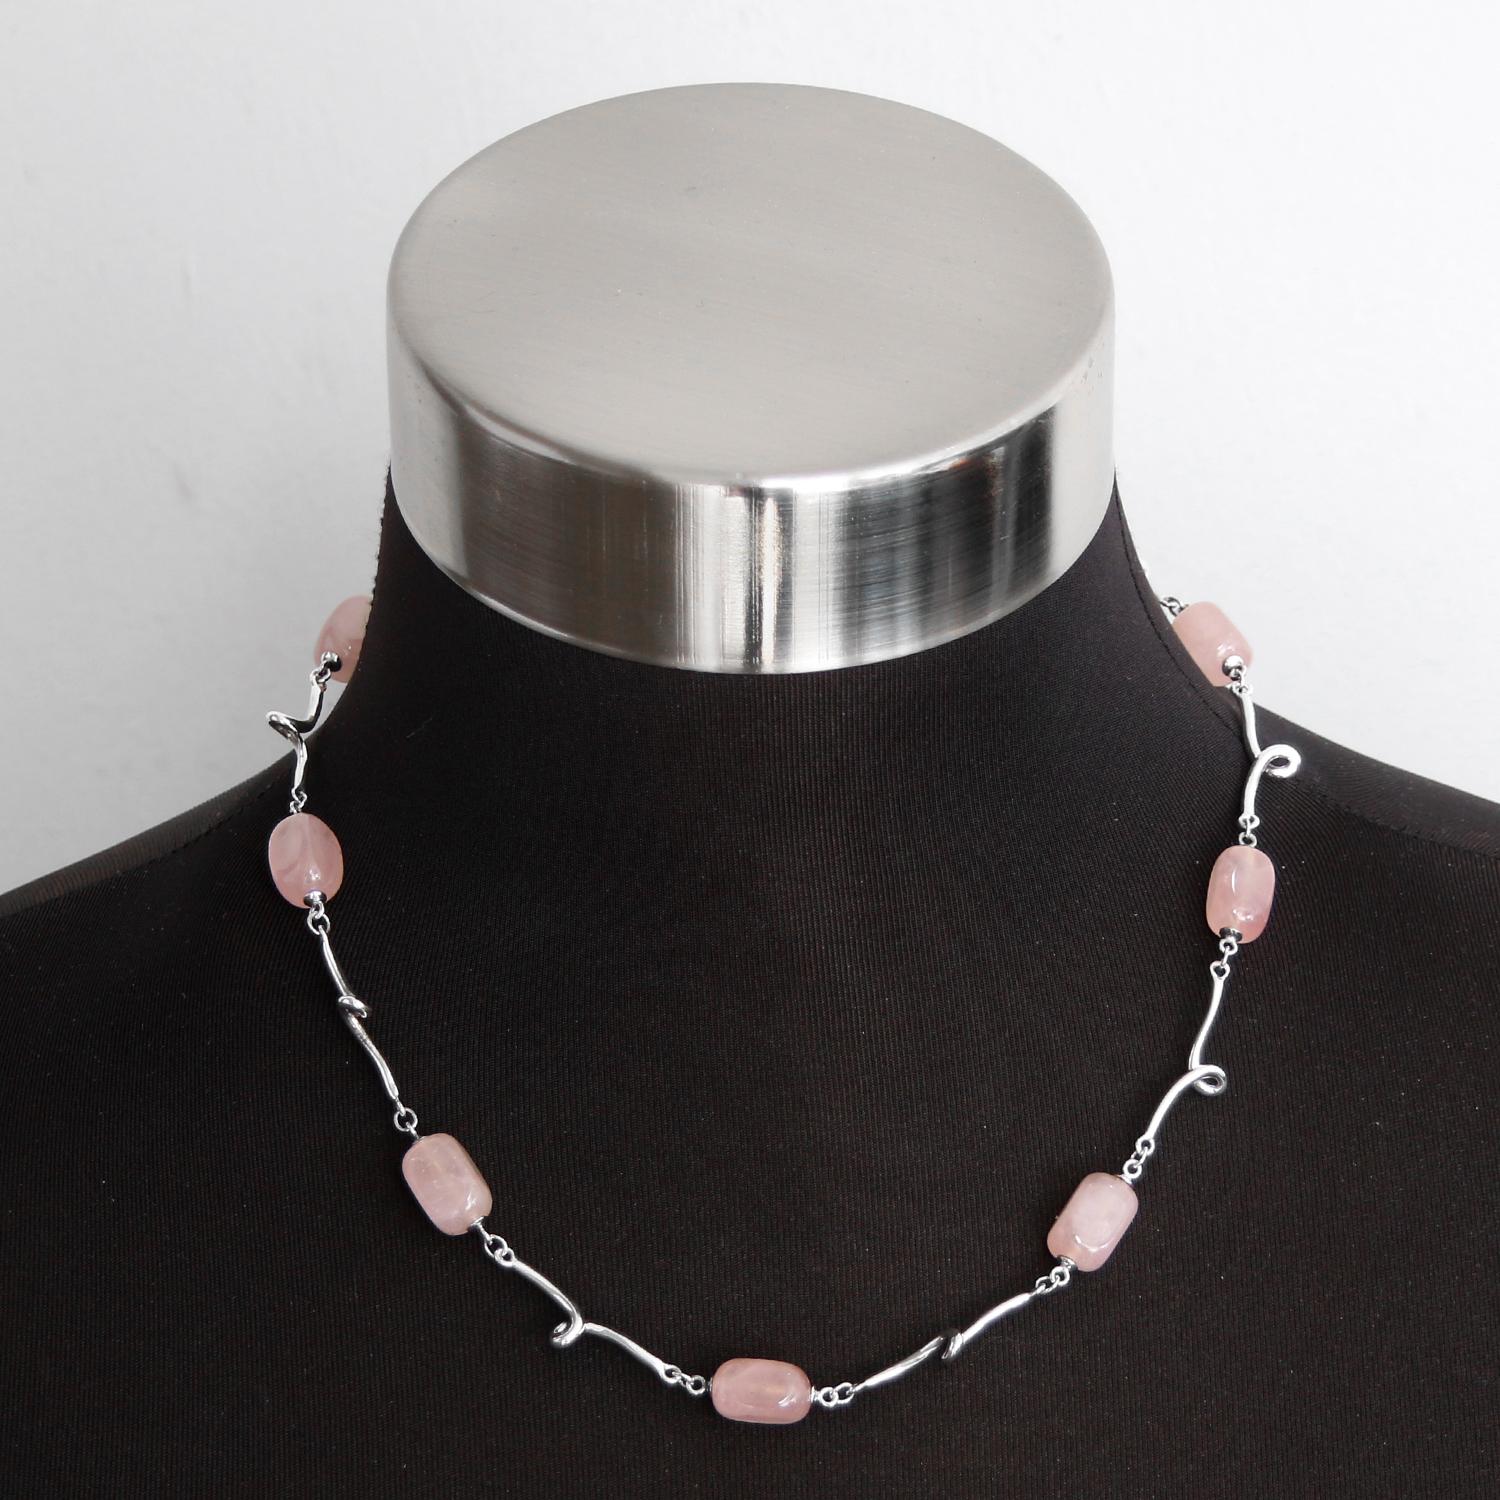 Tiffany & Co. Sterling Silver Rose Quartz Twirl Link Necklace - Nine rose Quartz stones on a 18 inch necklace. Sterling silver. Hallmarks: 925, designer signature. Pre-owned with Tiffany pouch .